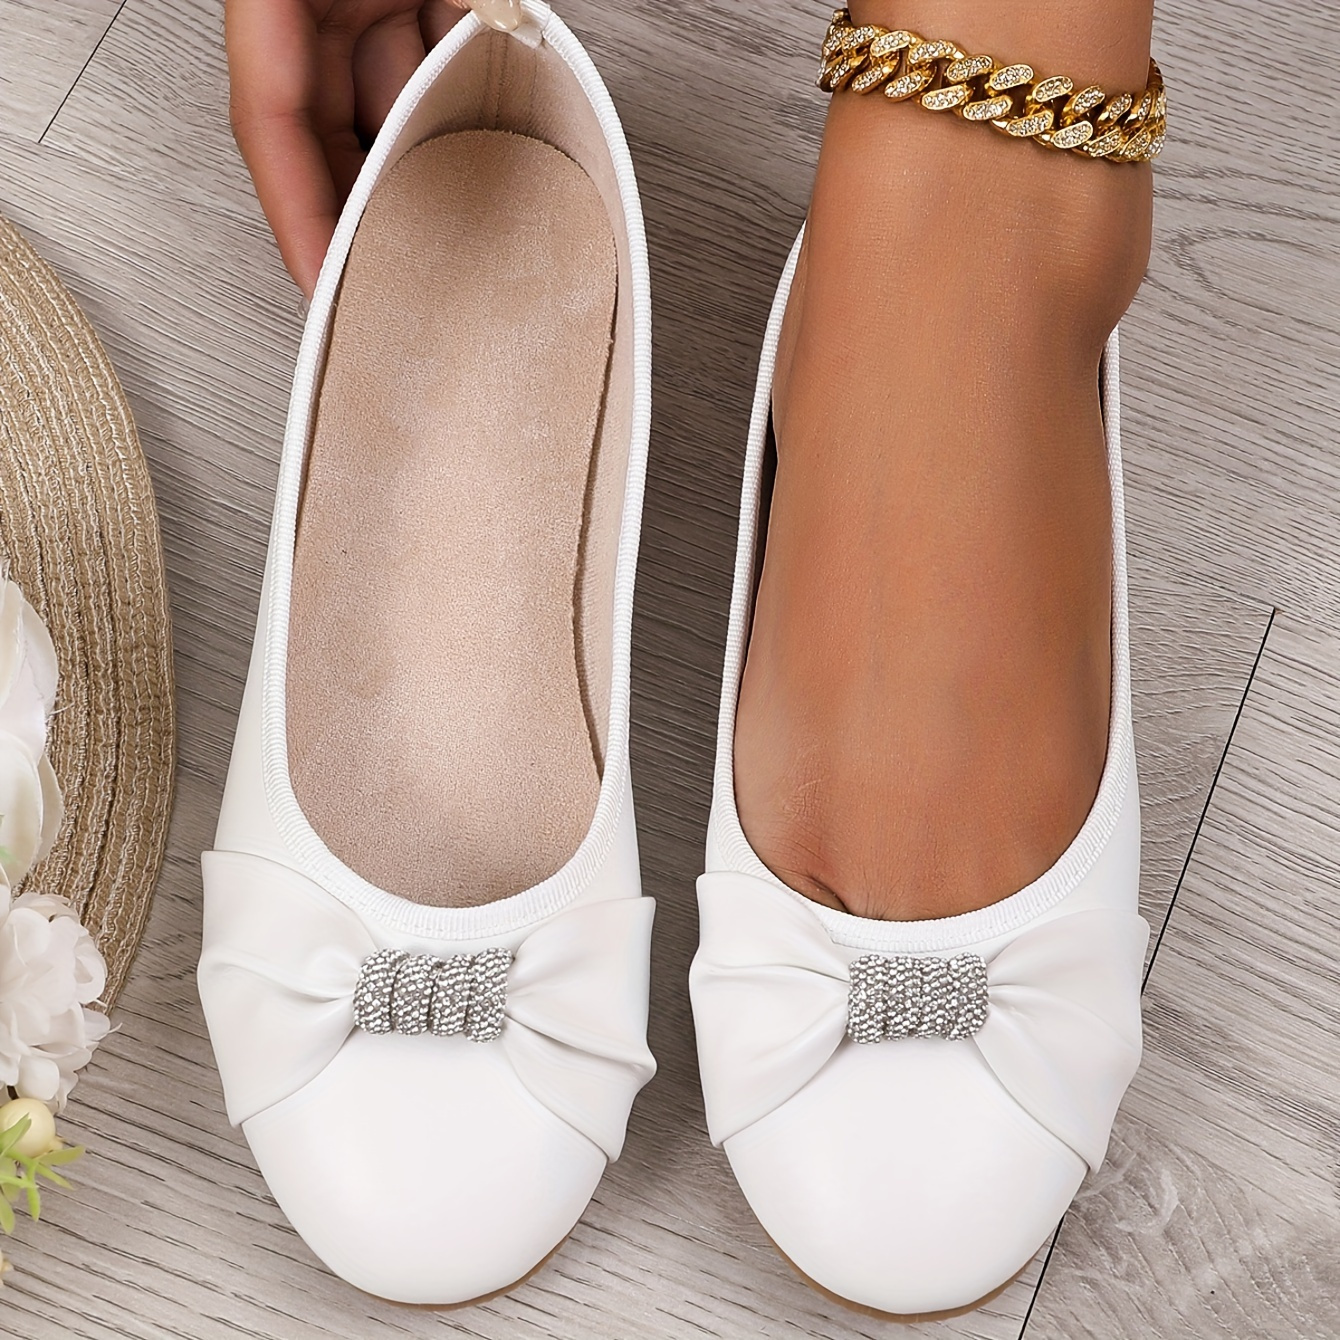 

Women's Rhinestone & Bowknot Decor Flat Shoes, Casual Slip On Round Toe Shoes, Lightweight & Comfortable Shoes